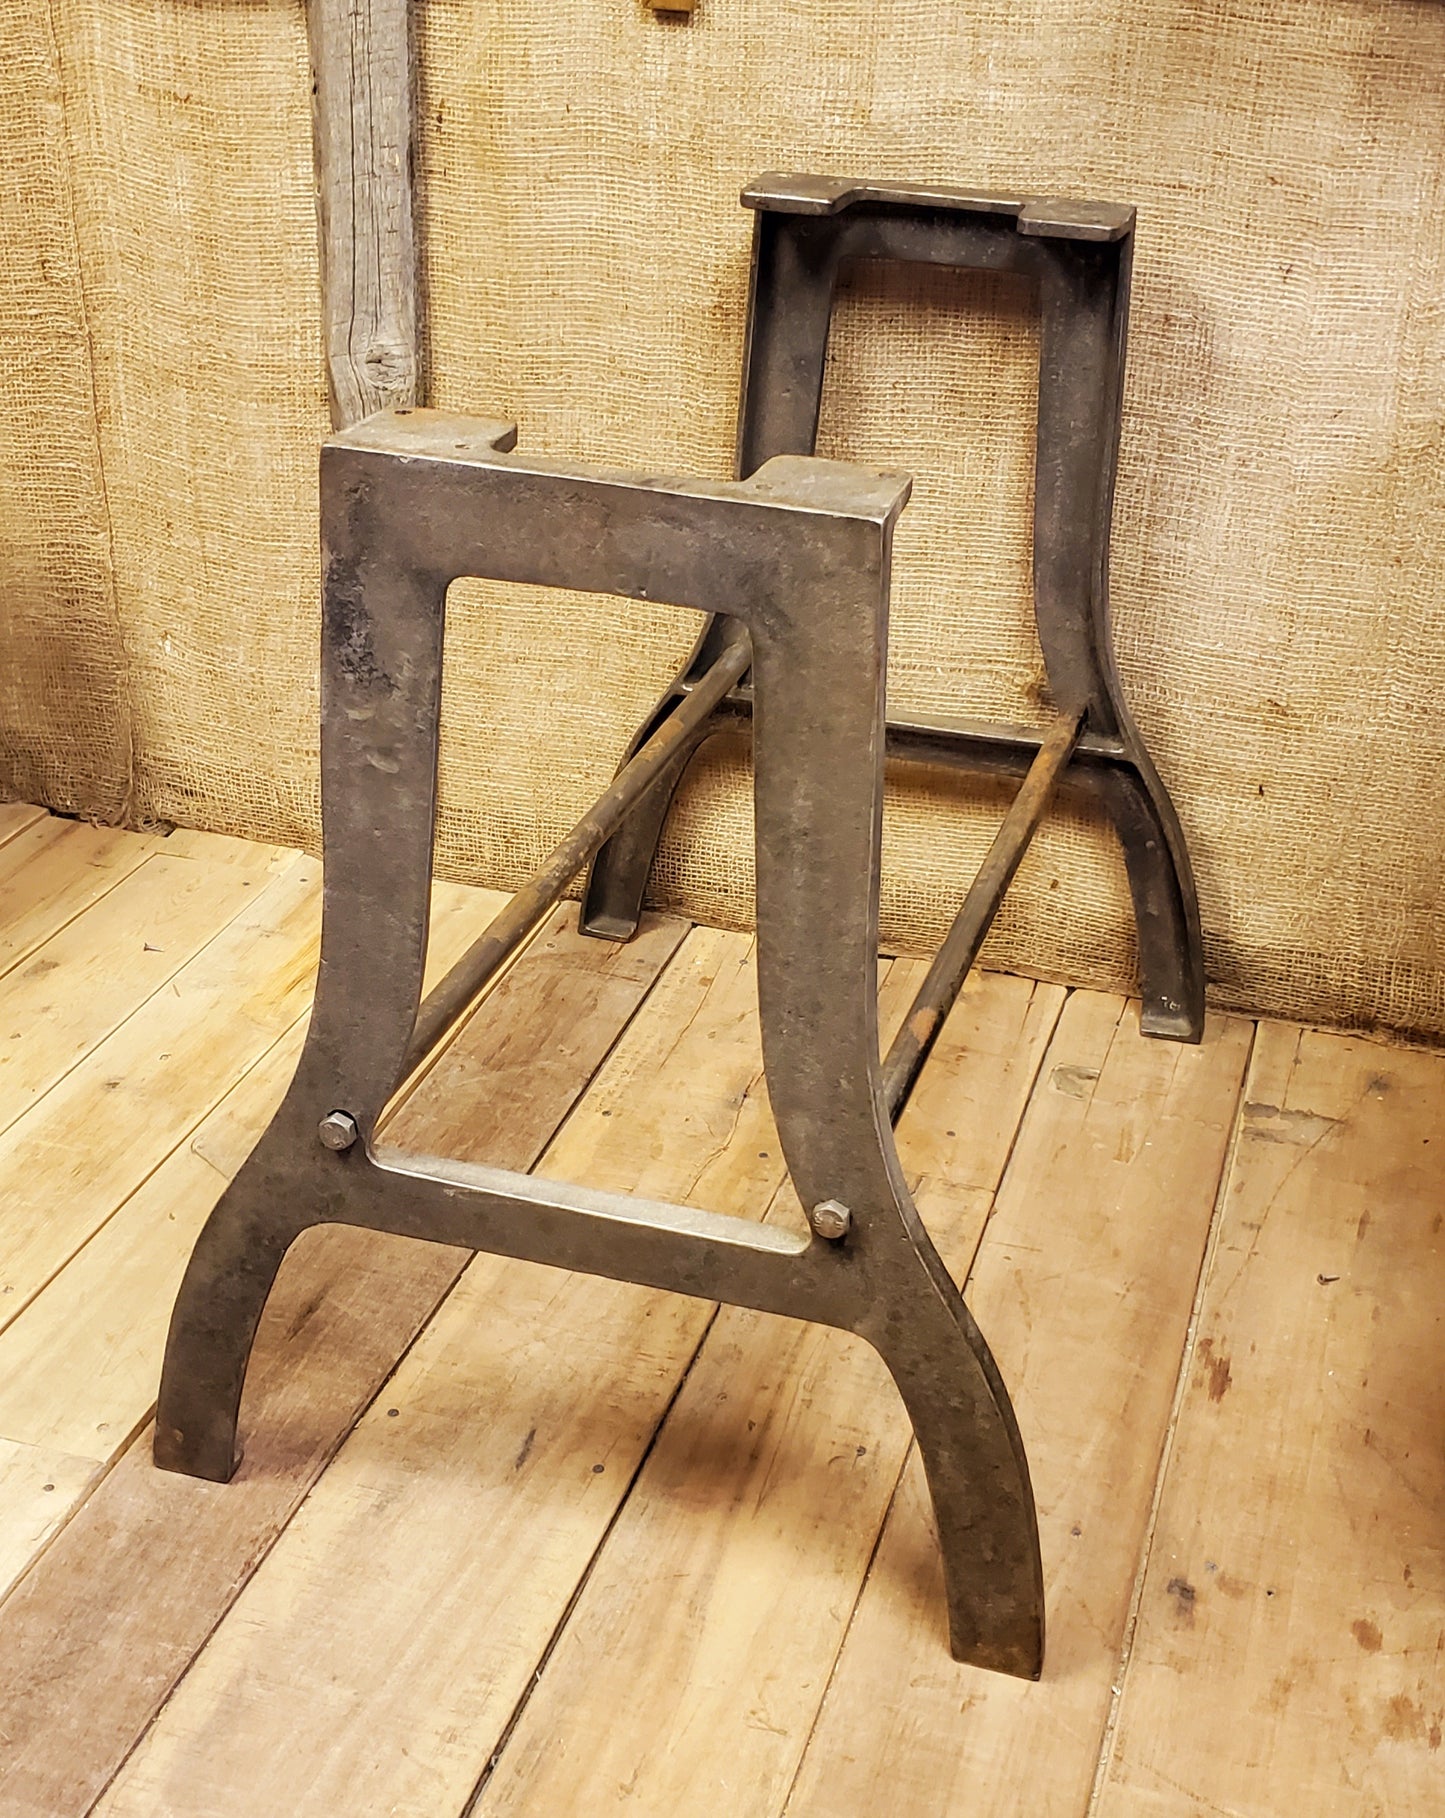 Abbot - Antique Iron Table Base - (No Top) 3 sizes